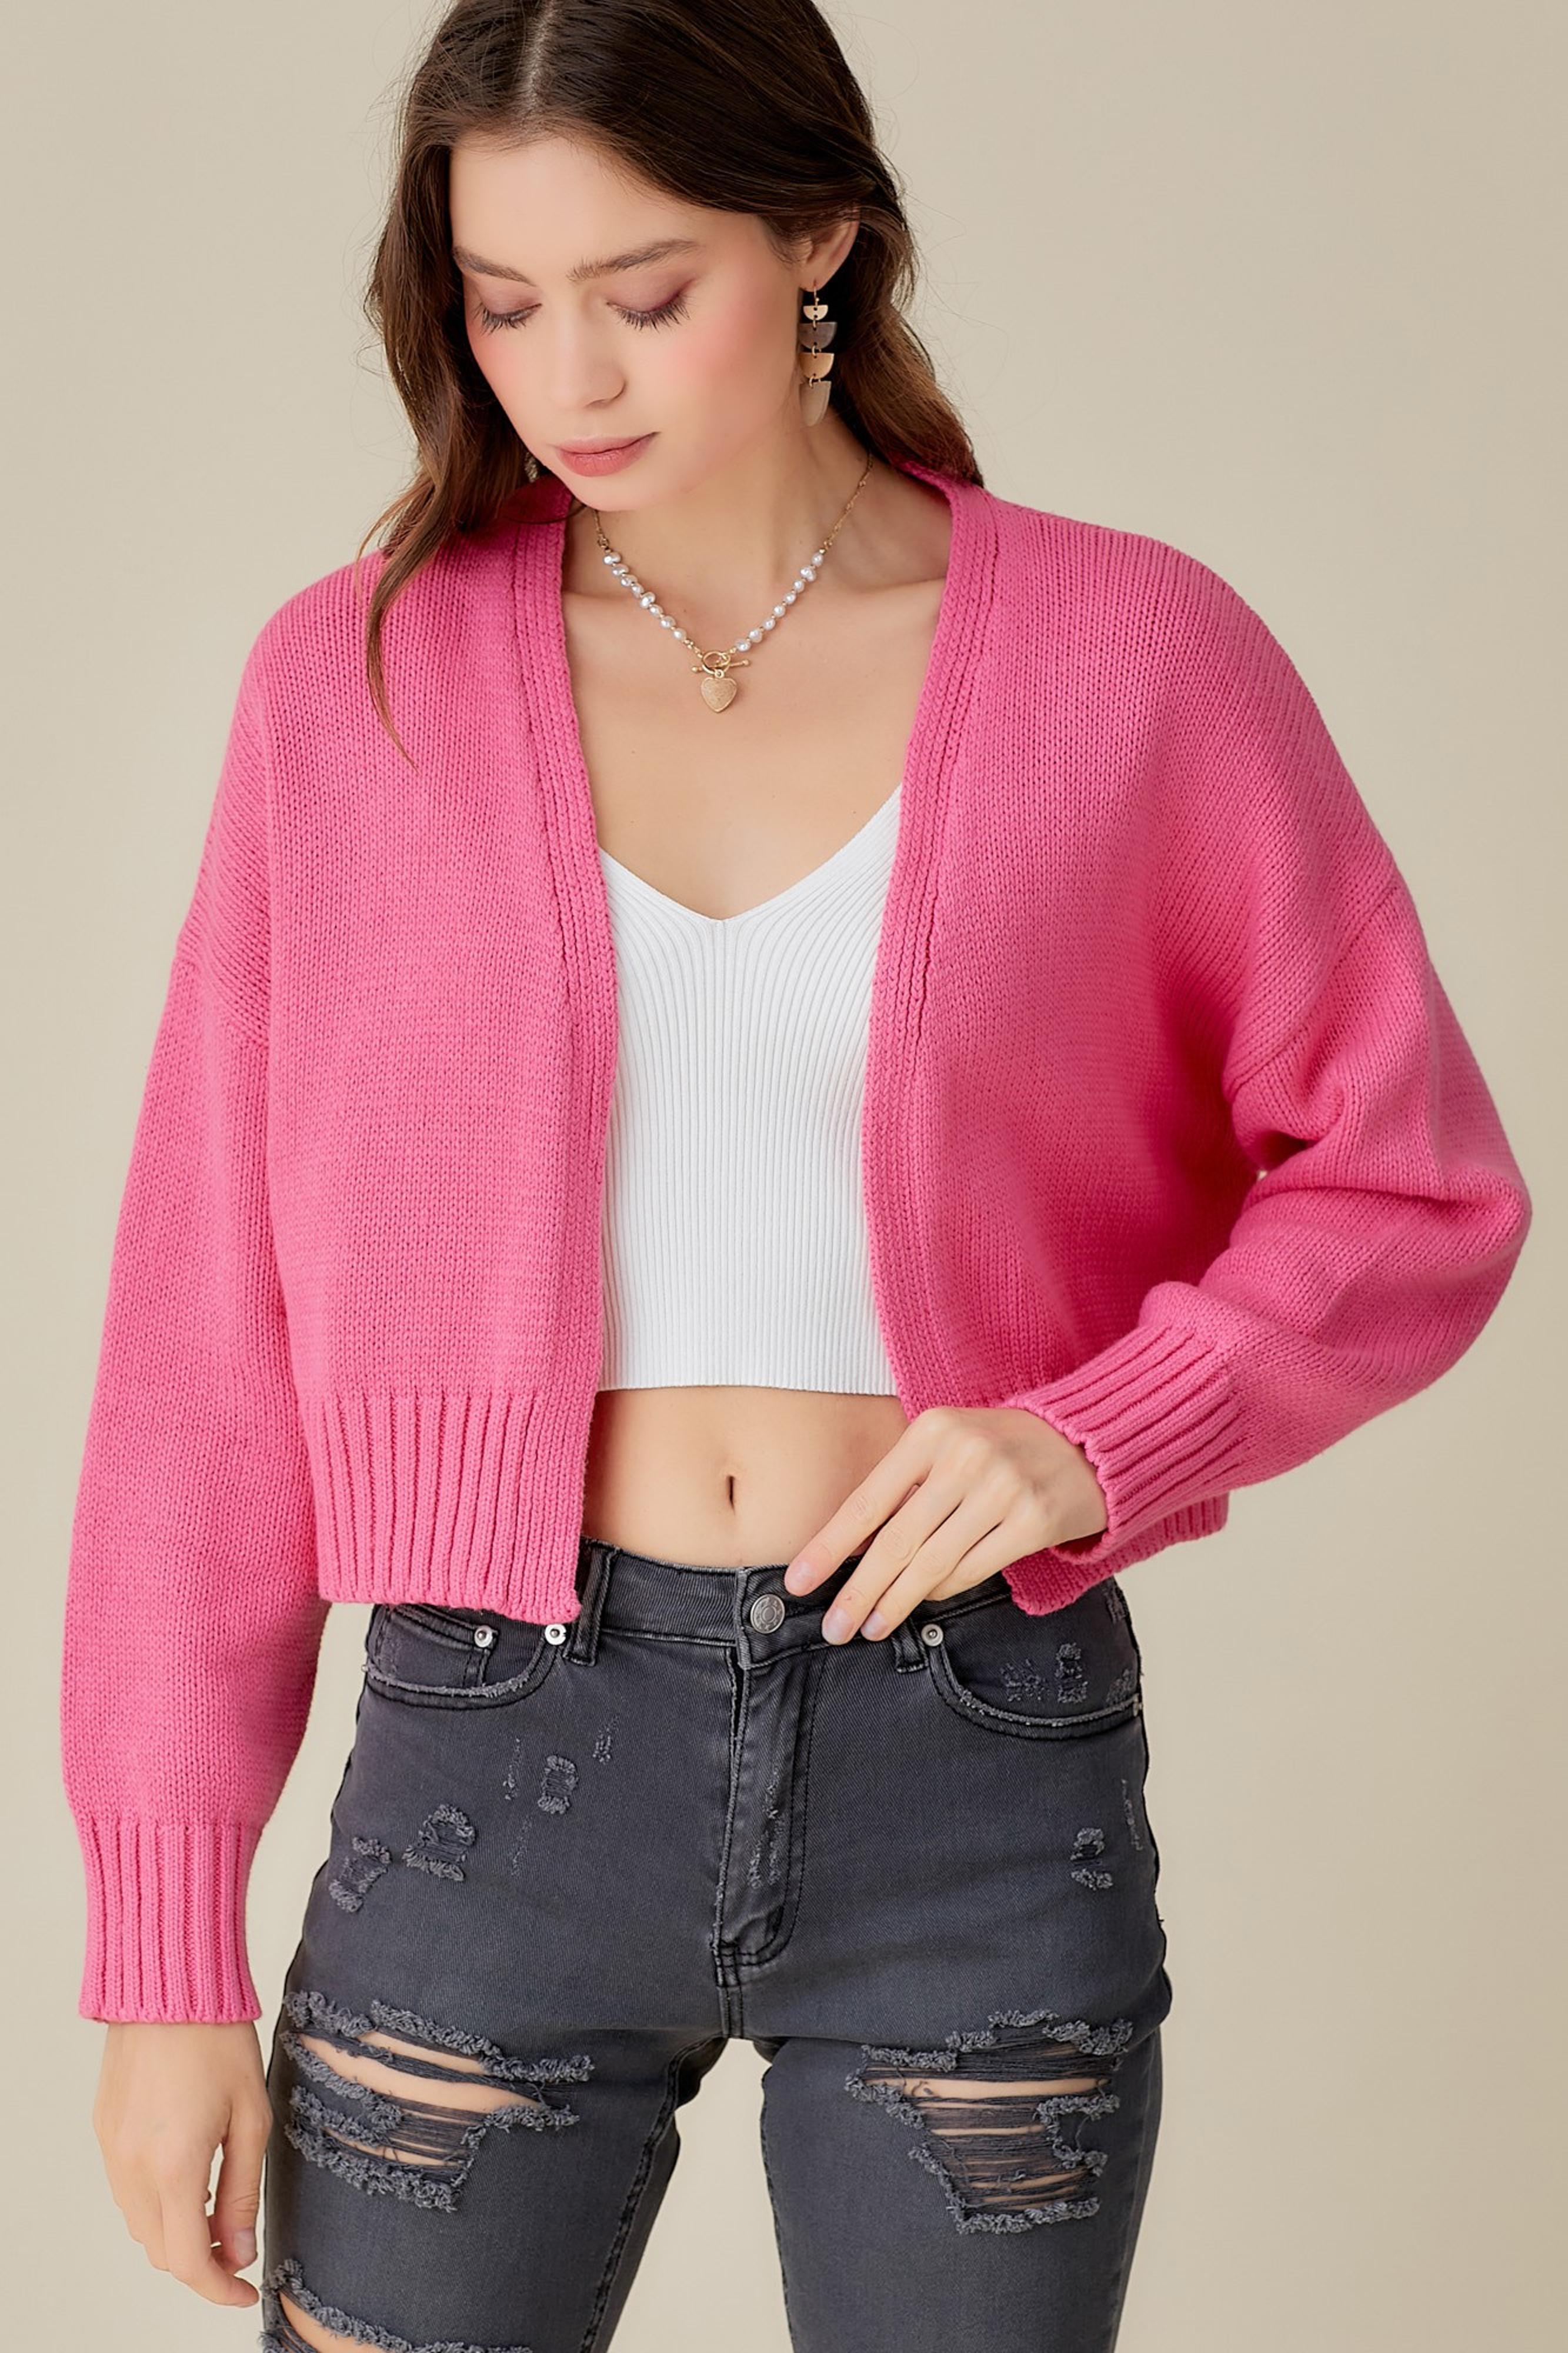  Easy Nights Cropped Sweater Cardigan